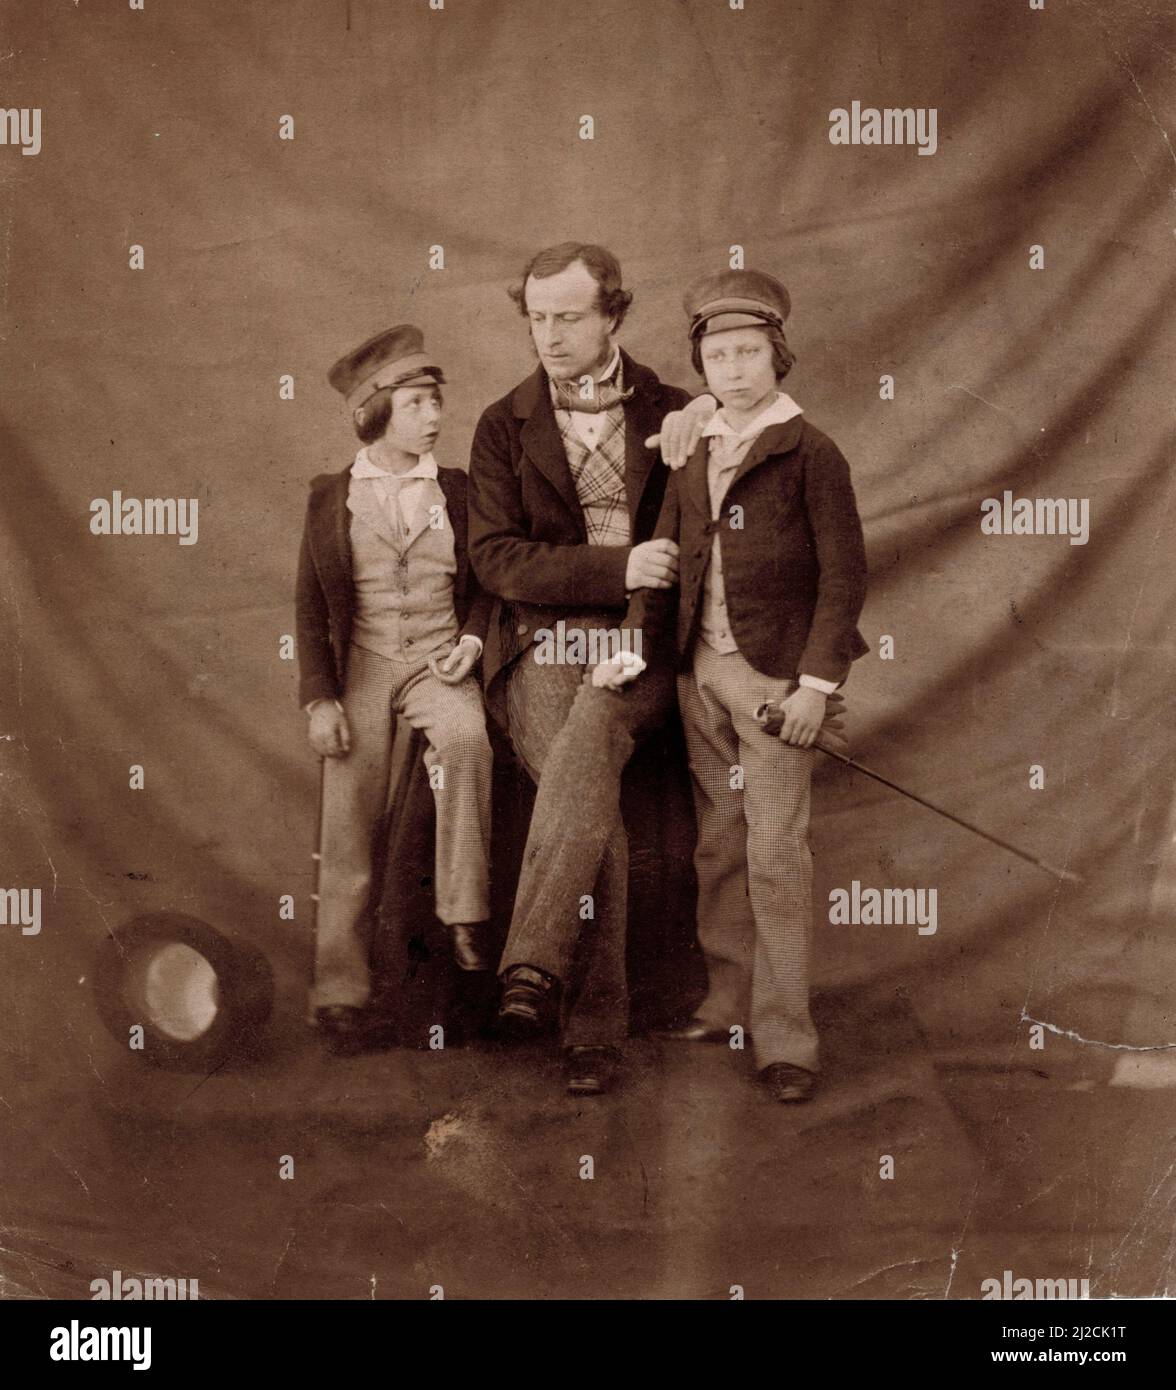 Group portrait of Prince Alfred (Alfred Earnest Albert) (1844 - 1900) (left), the Prince of Wales (Albert Edward) (1841 - 1910) (right) and their tutor, Frederick Waymouth Gibbs (1821 - 1898) (center), February 8, 1854. Photography by Roger Fenton (1819 - 1869). Stock Photo